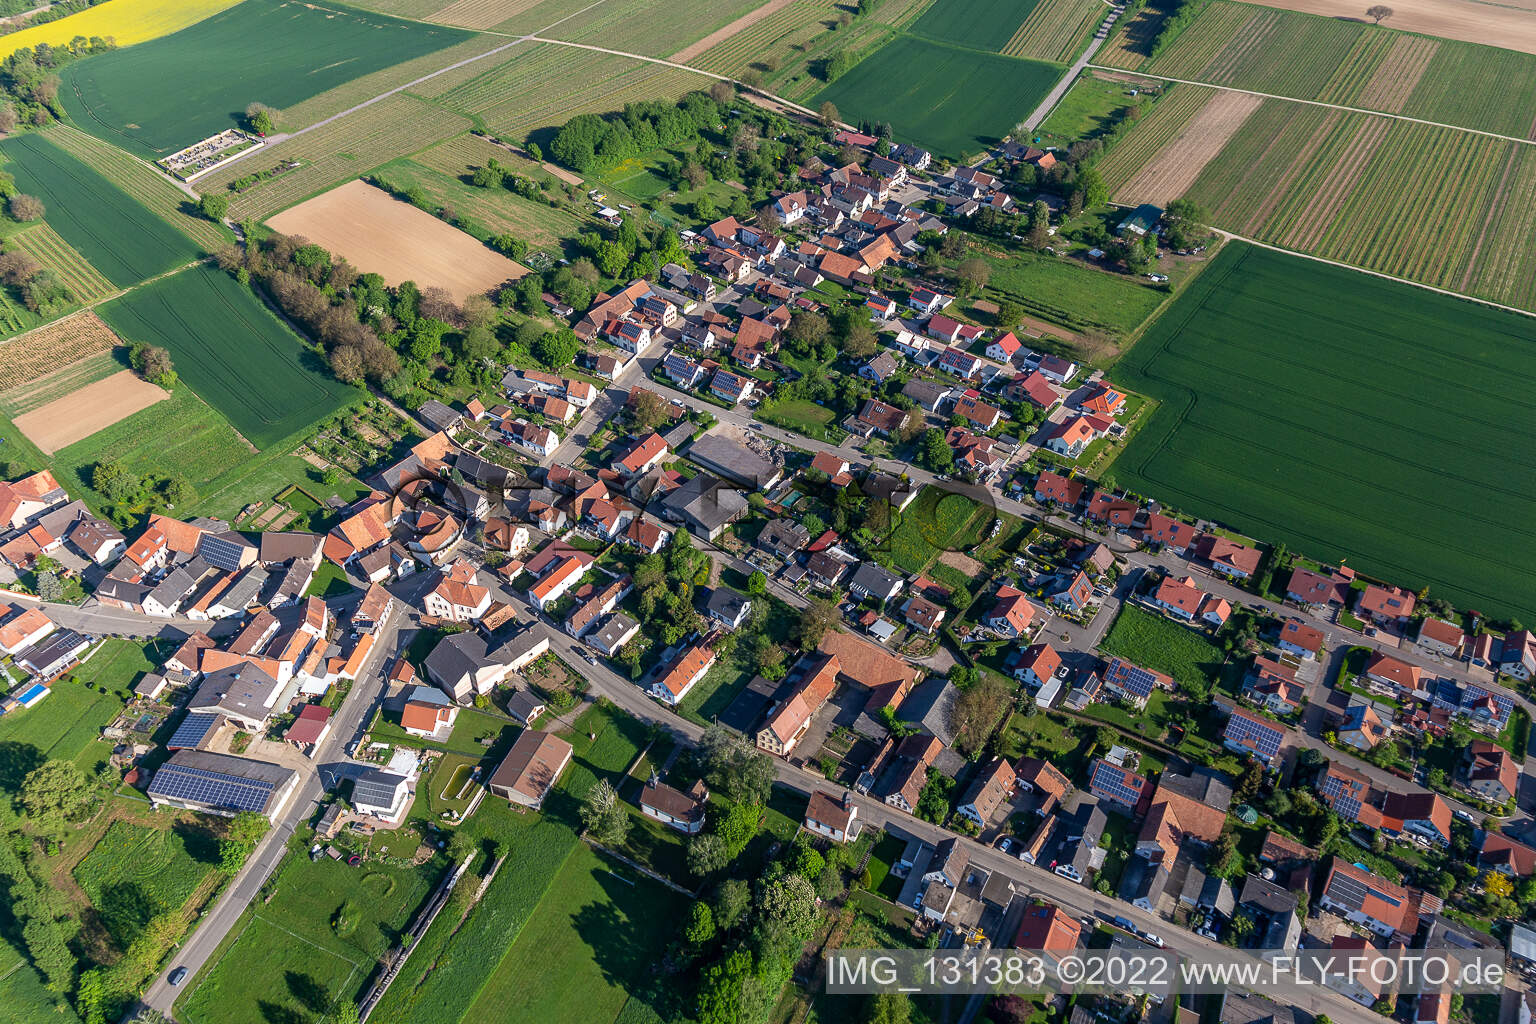 District Kleinsteinfeld in Niederotterbach in the state Rhineland-Palatinate, Germany from the drone perspective